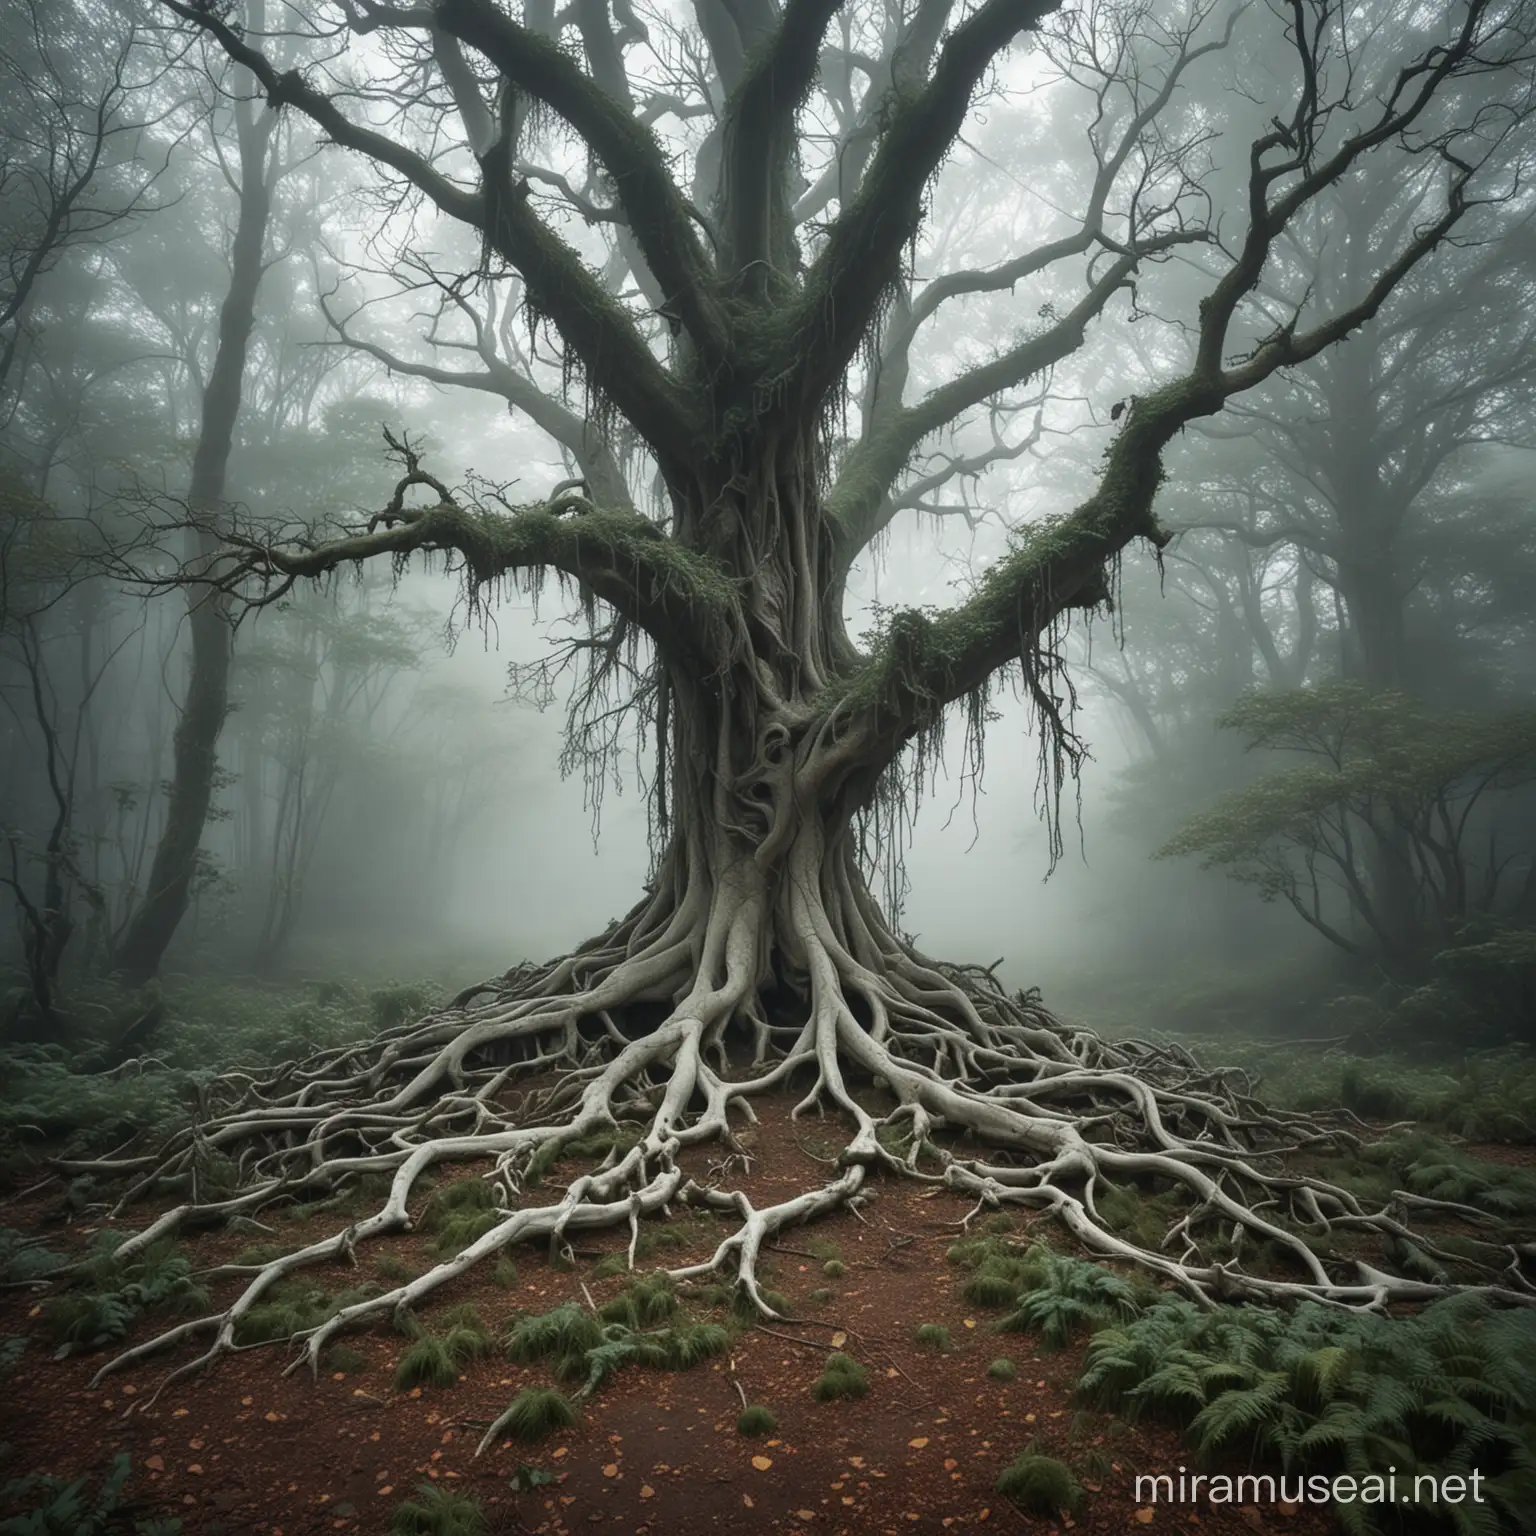 art nouveau style, ancient tree in middle of forest, bones tangled in between the roots, misty morning, magical world